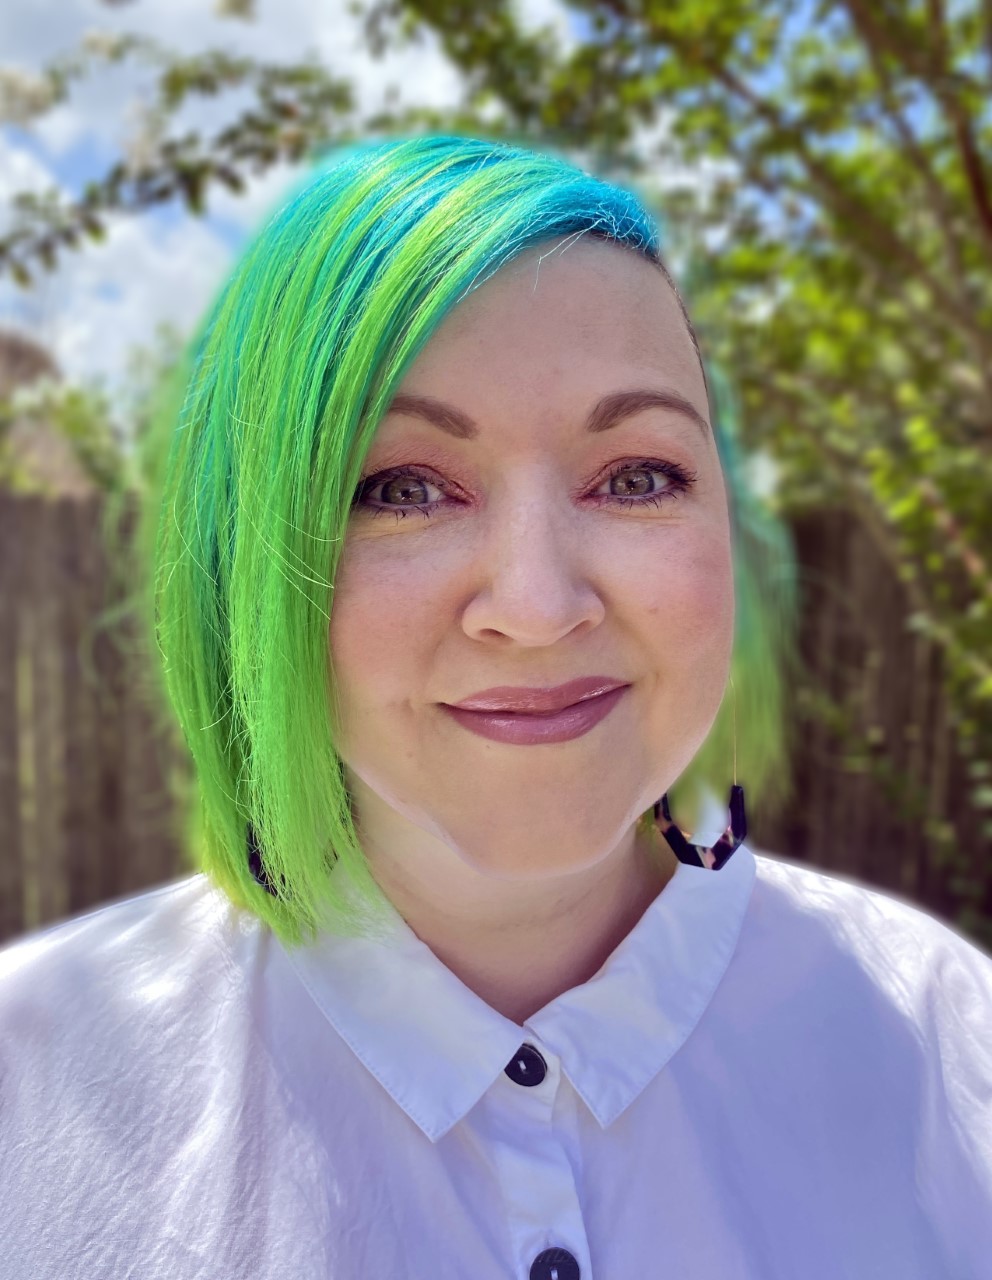 A headshot of a woman with short bright green hair